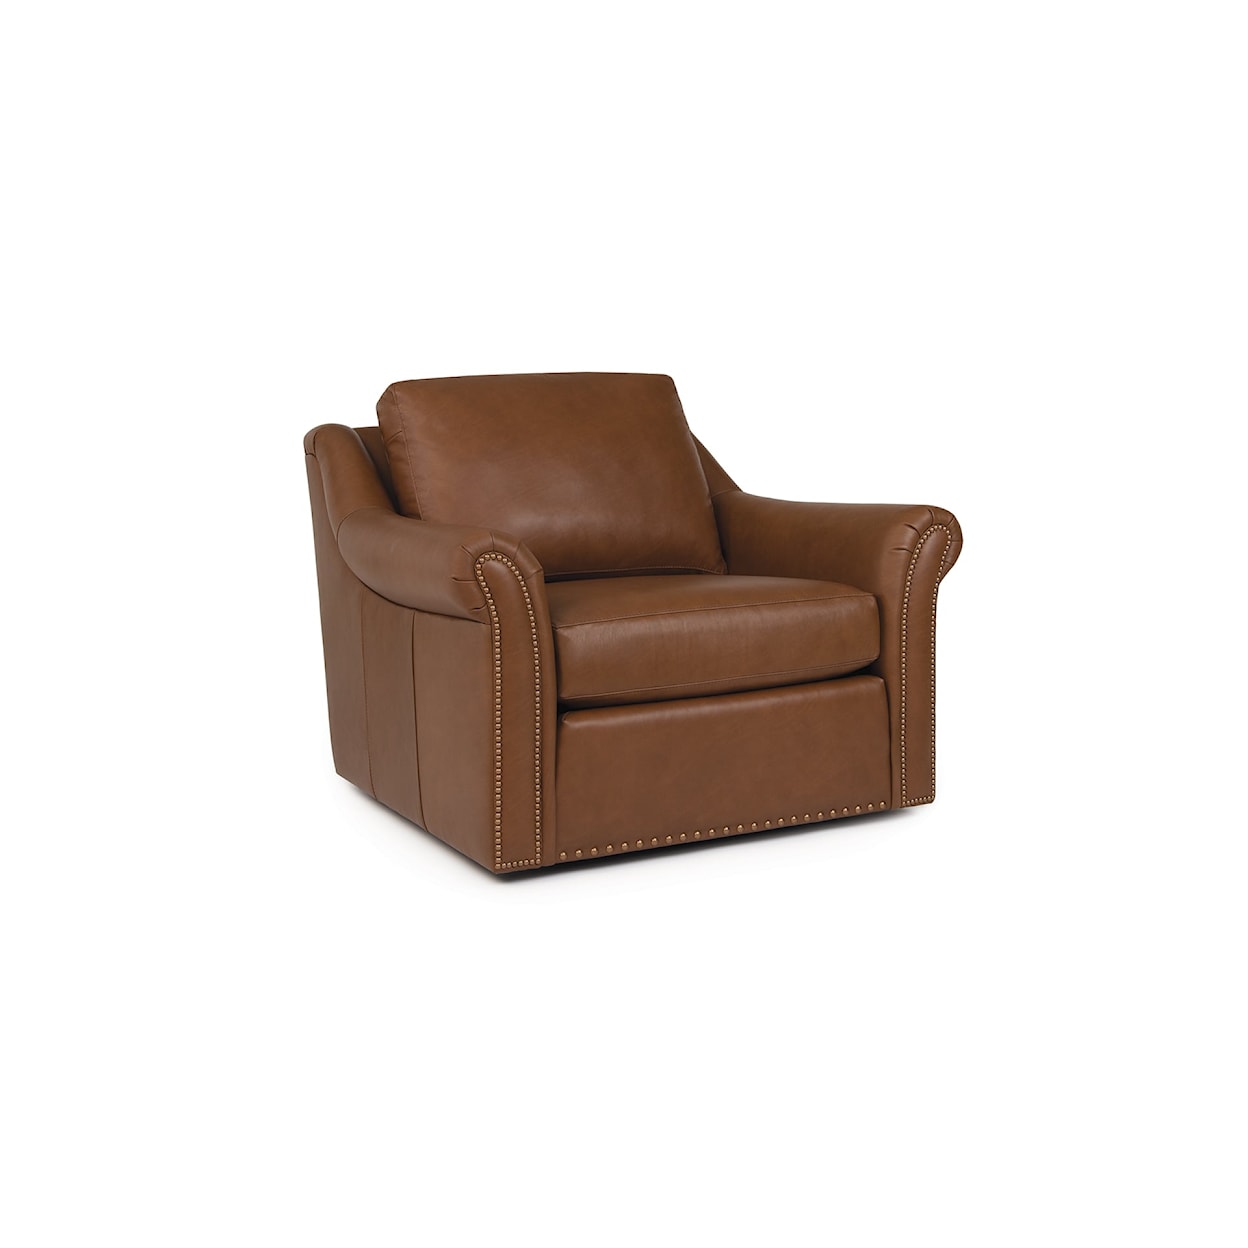 Smith Brothers Build Your Own 9000 Series Leather Swivel Chair